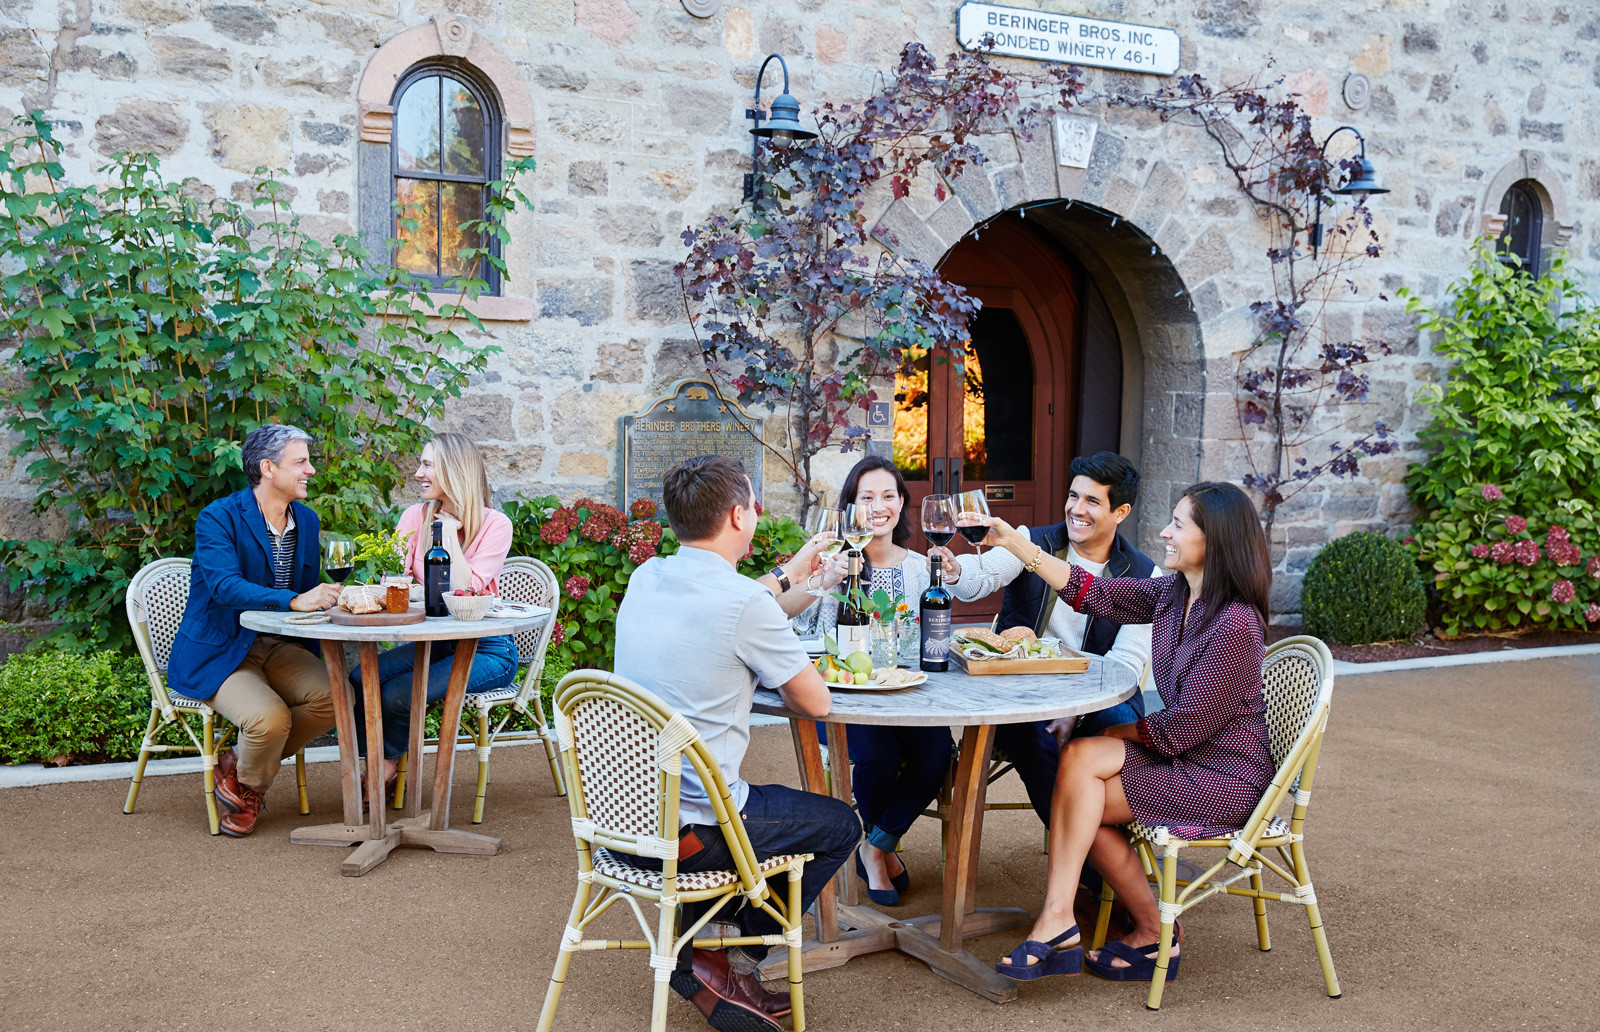 Beringer Winery lets you bring your own food.